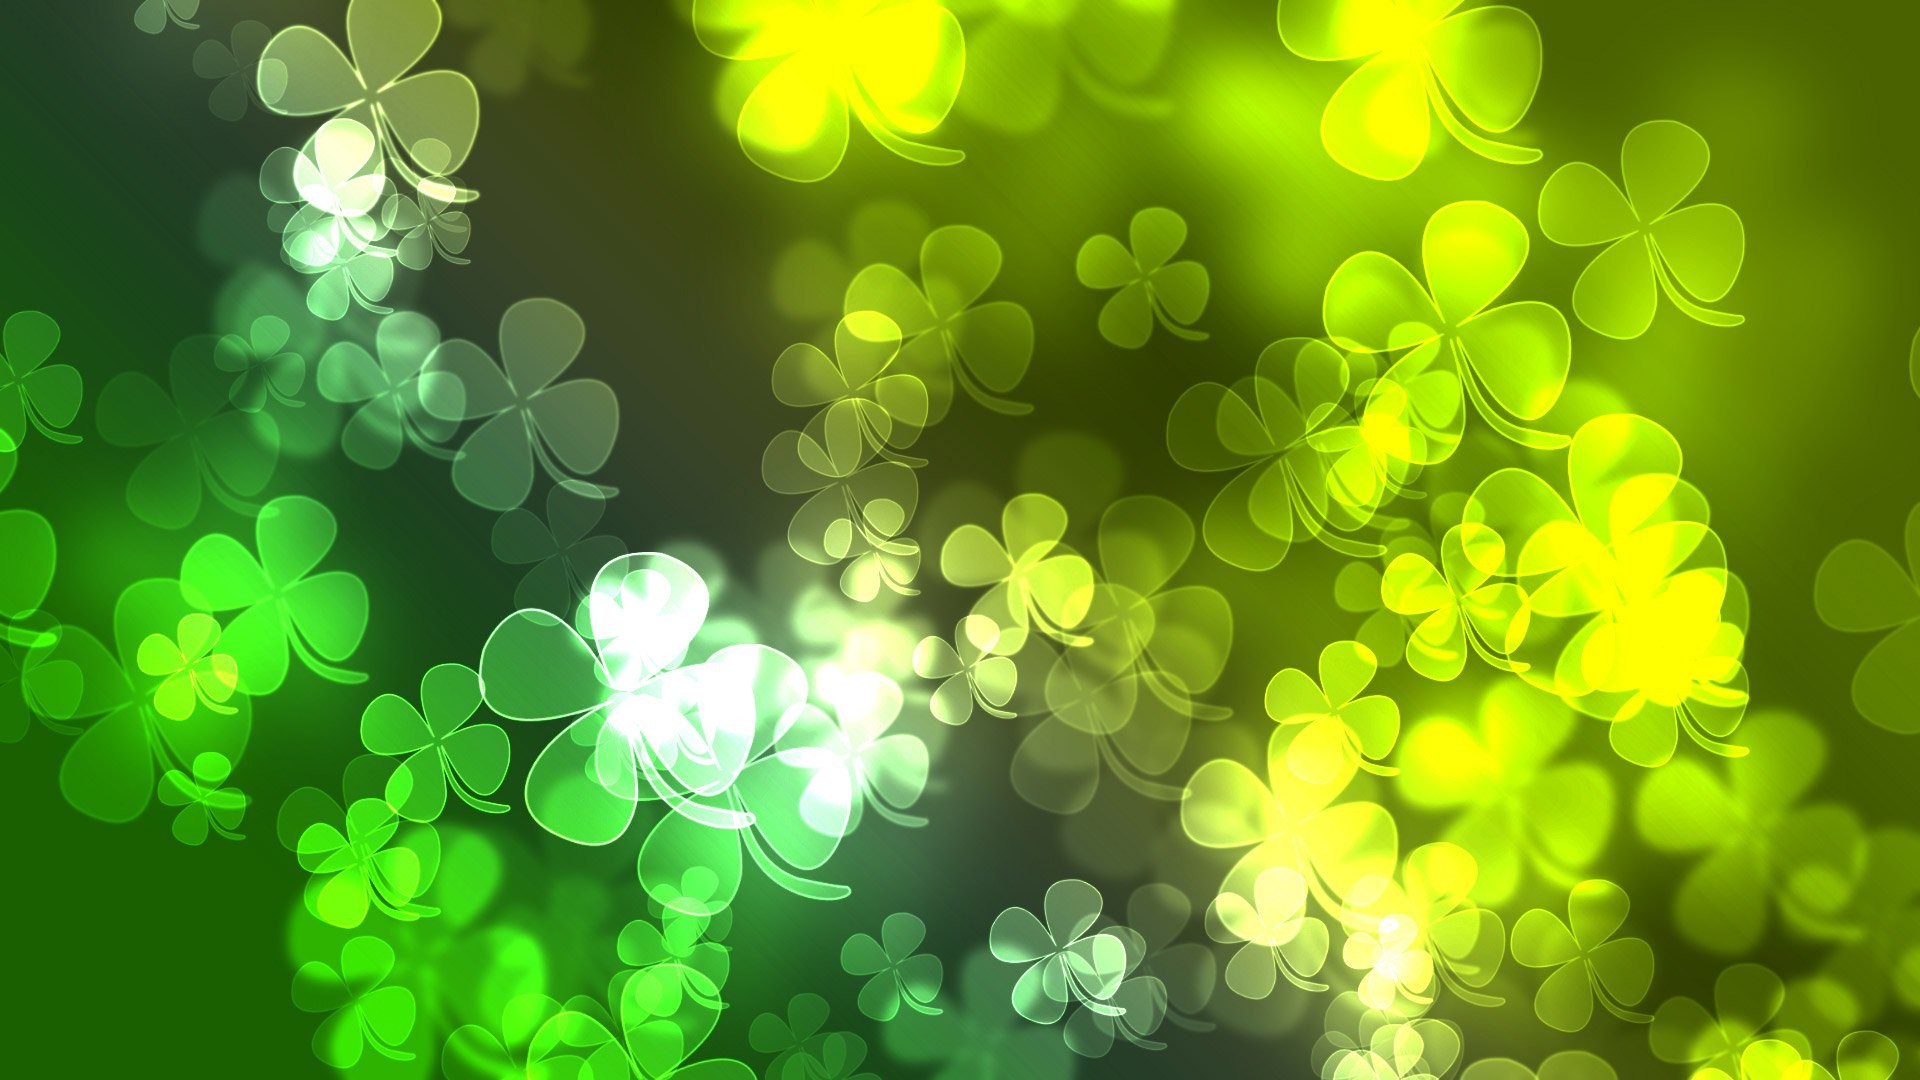 1920x1080 Happy St. Patrick's Day HD Wallpaper | Background Image |  |  ID:904370 - Wallpaper Abyss